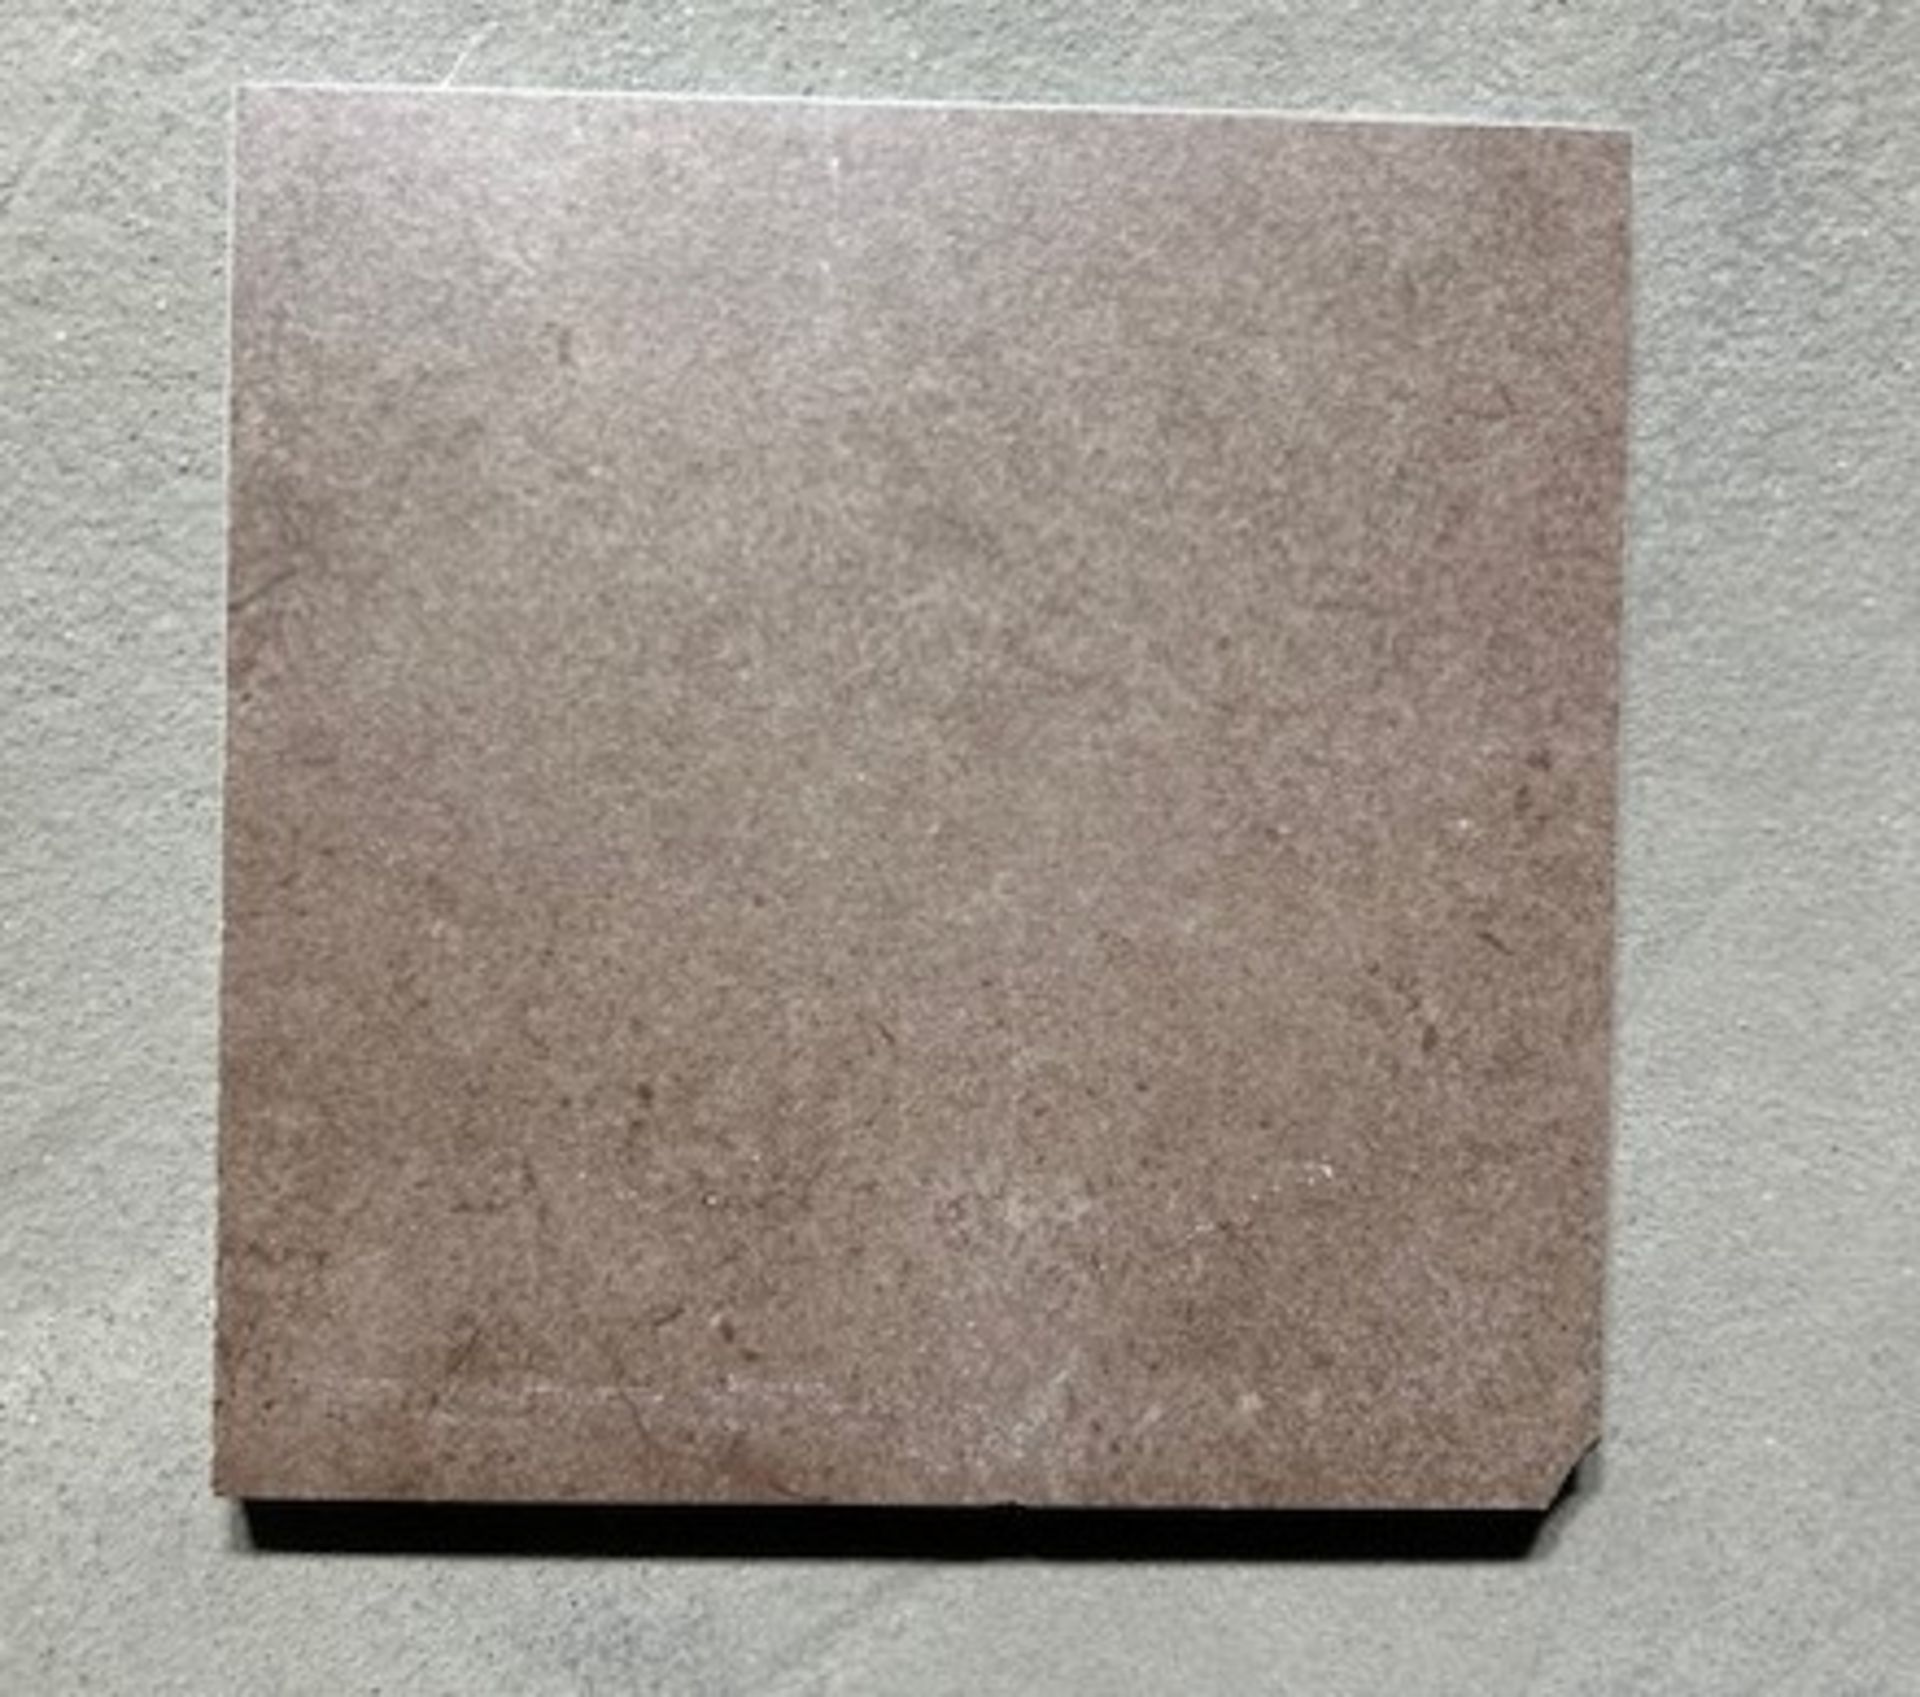 (330) Square Feet, ABK Coffee Brown Porcelain, 6" x 6", Floor and Wall Tiles